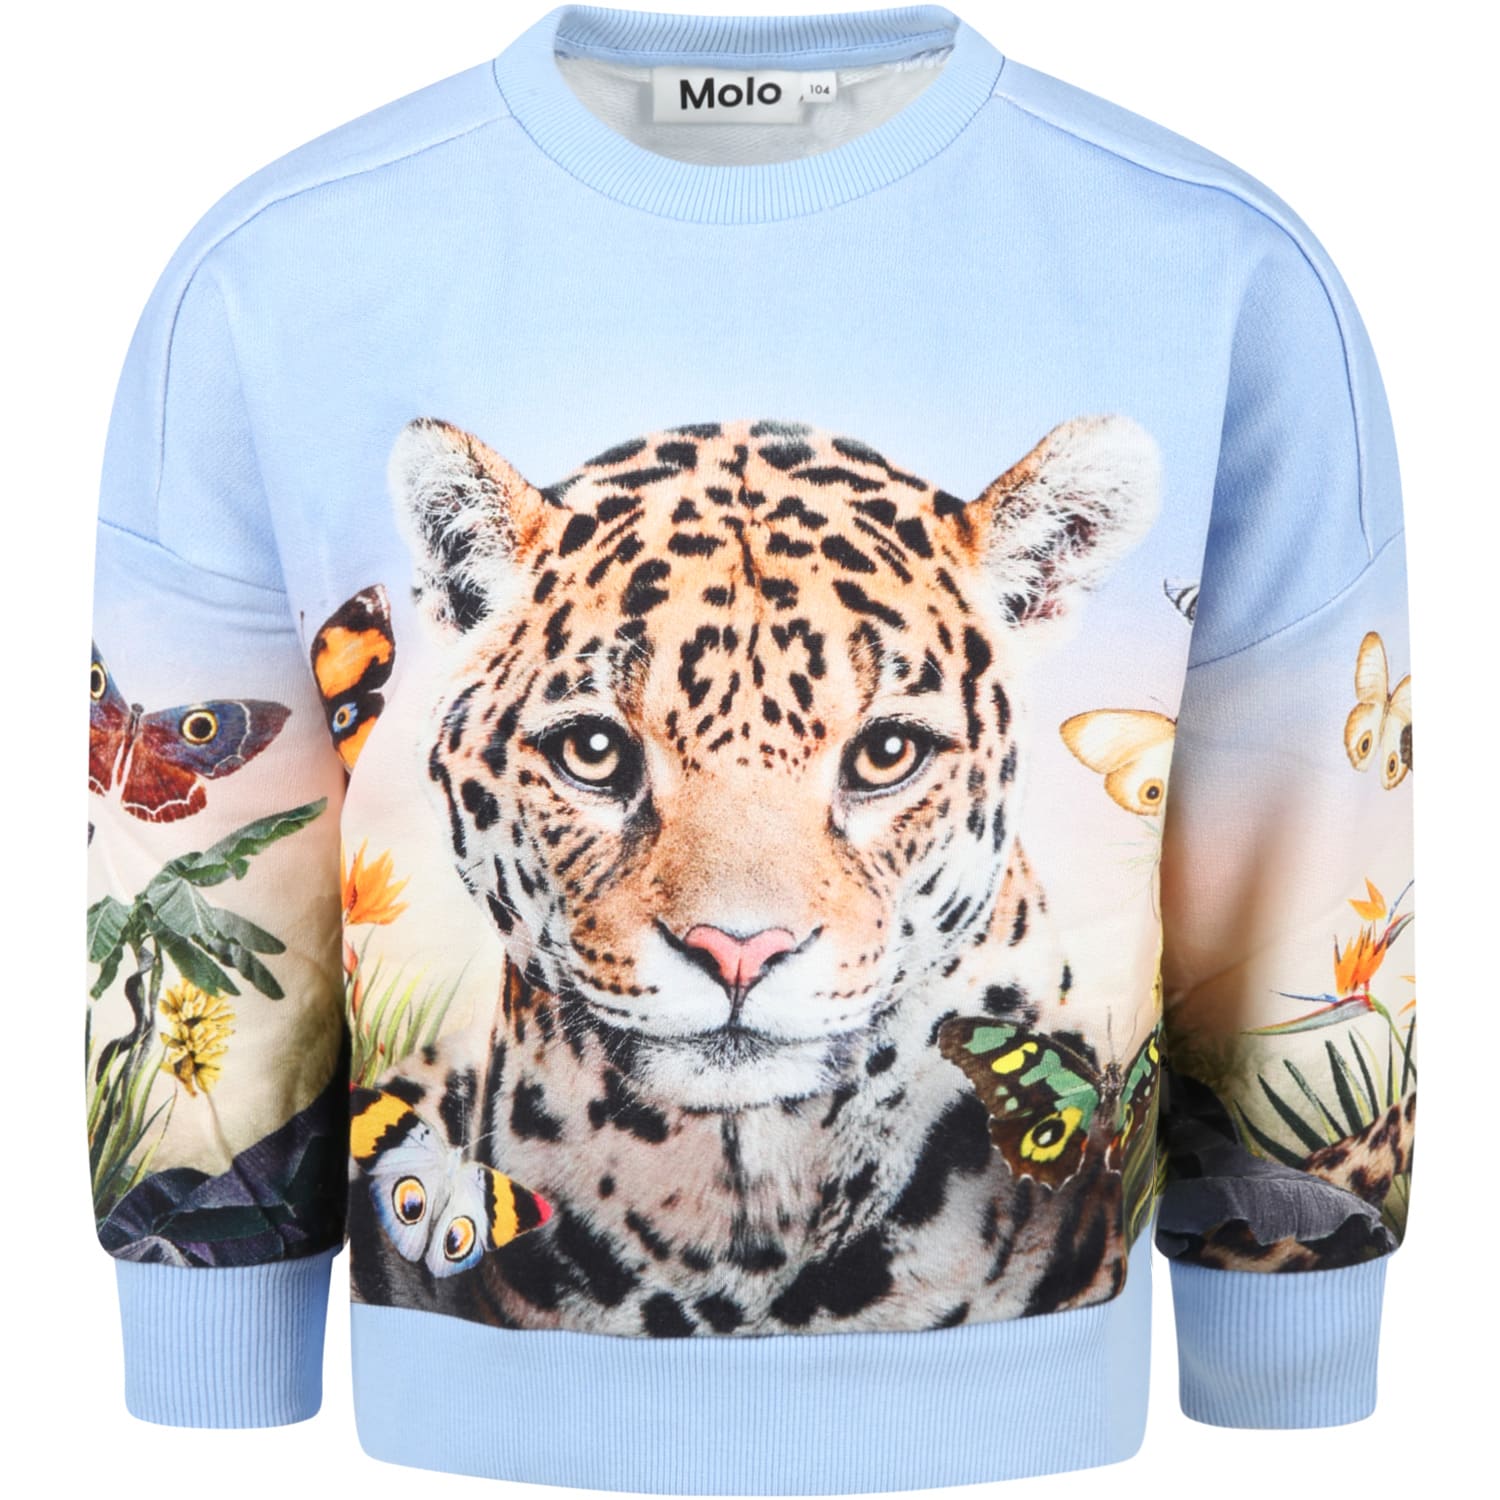 Molo Light-blue Sweatshirt For Kids With Tiger